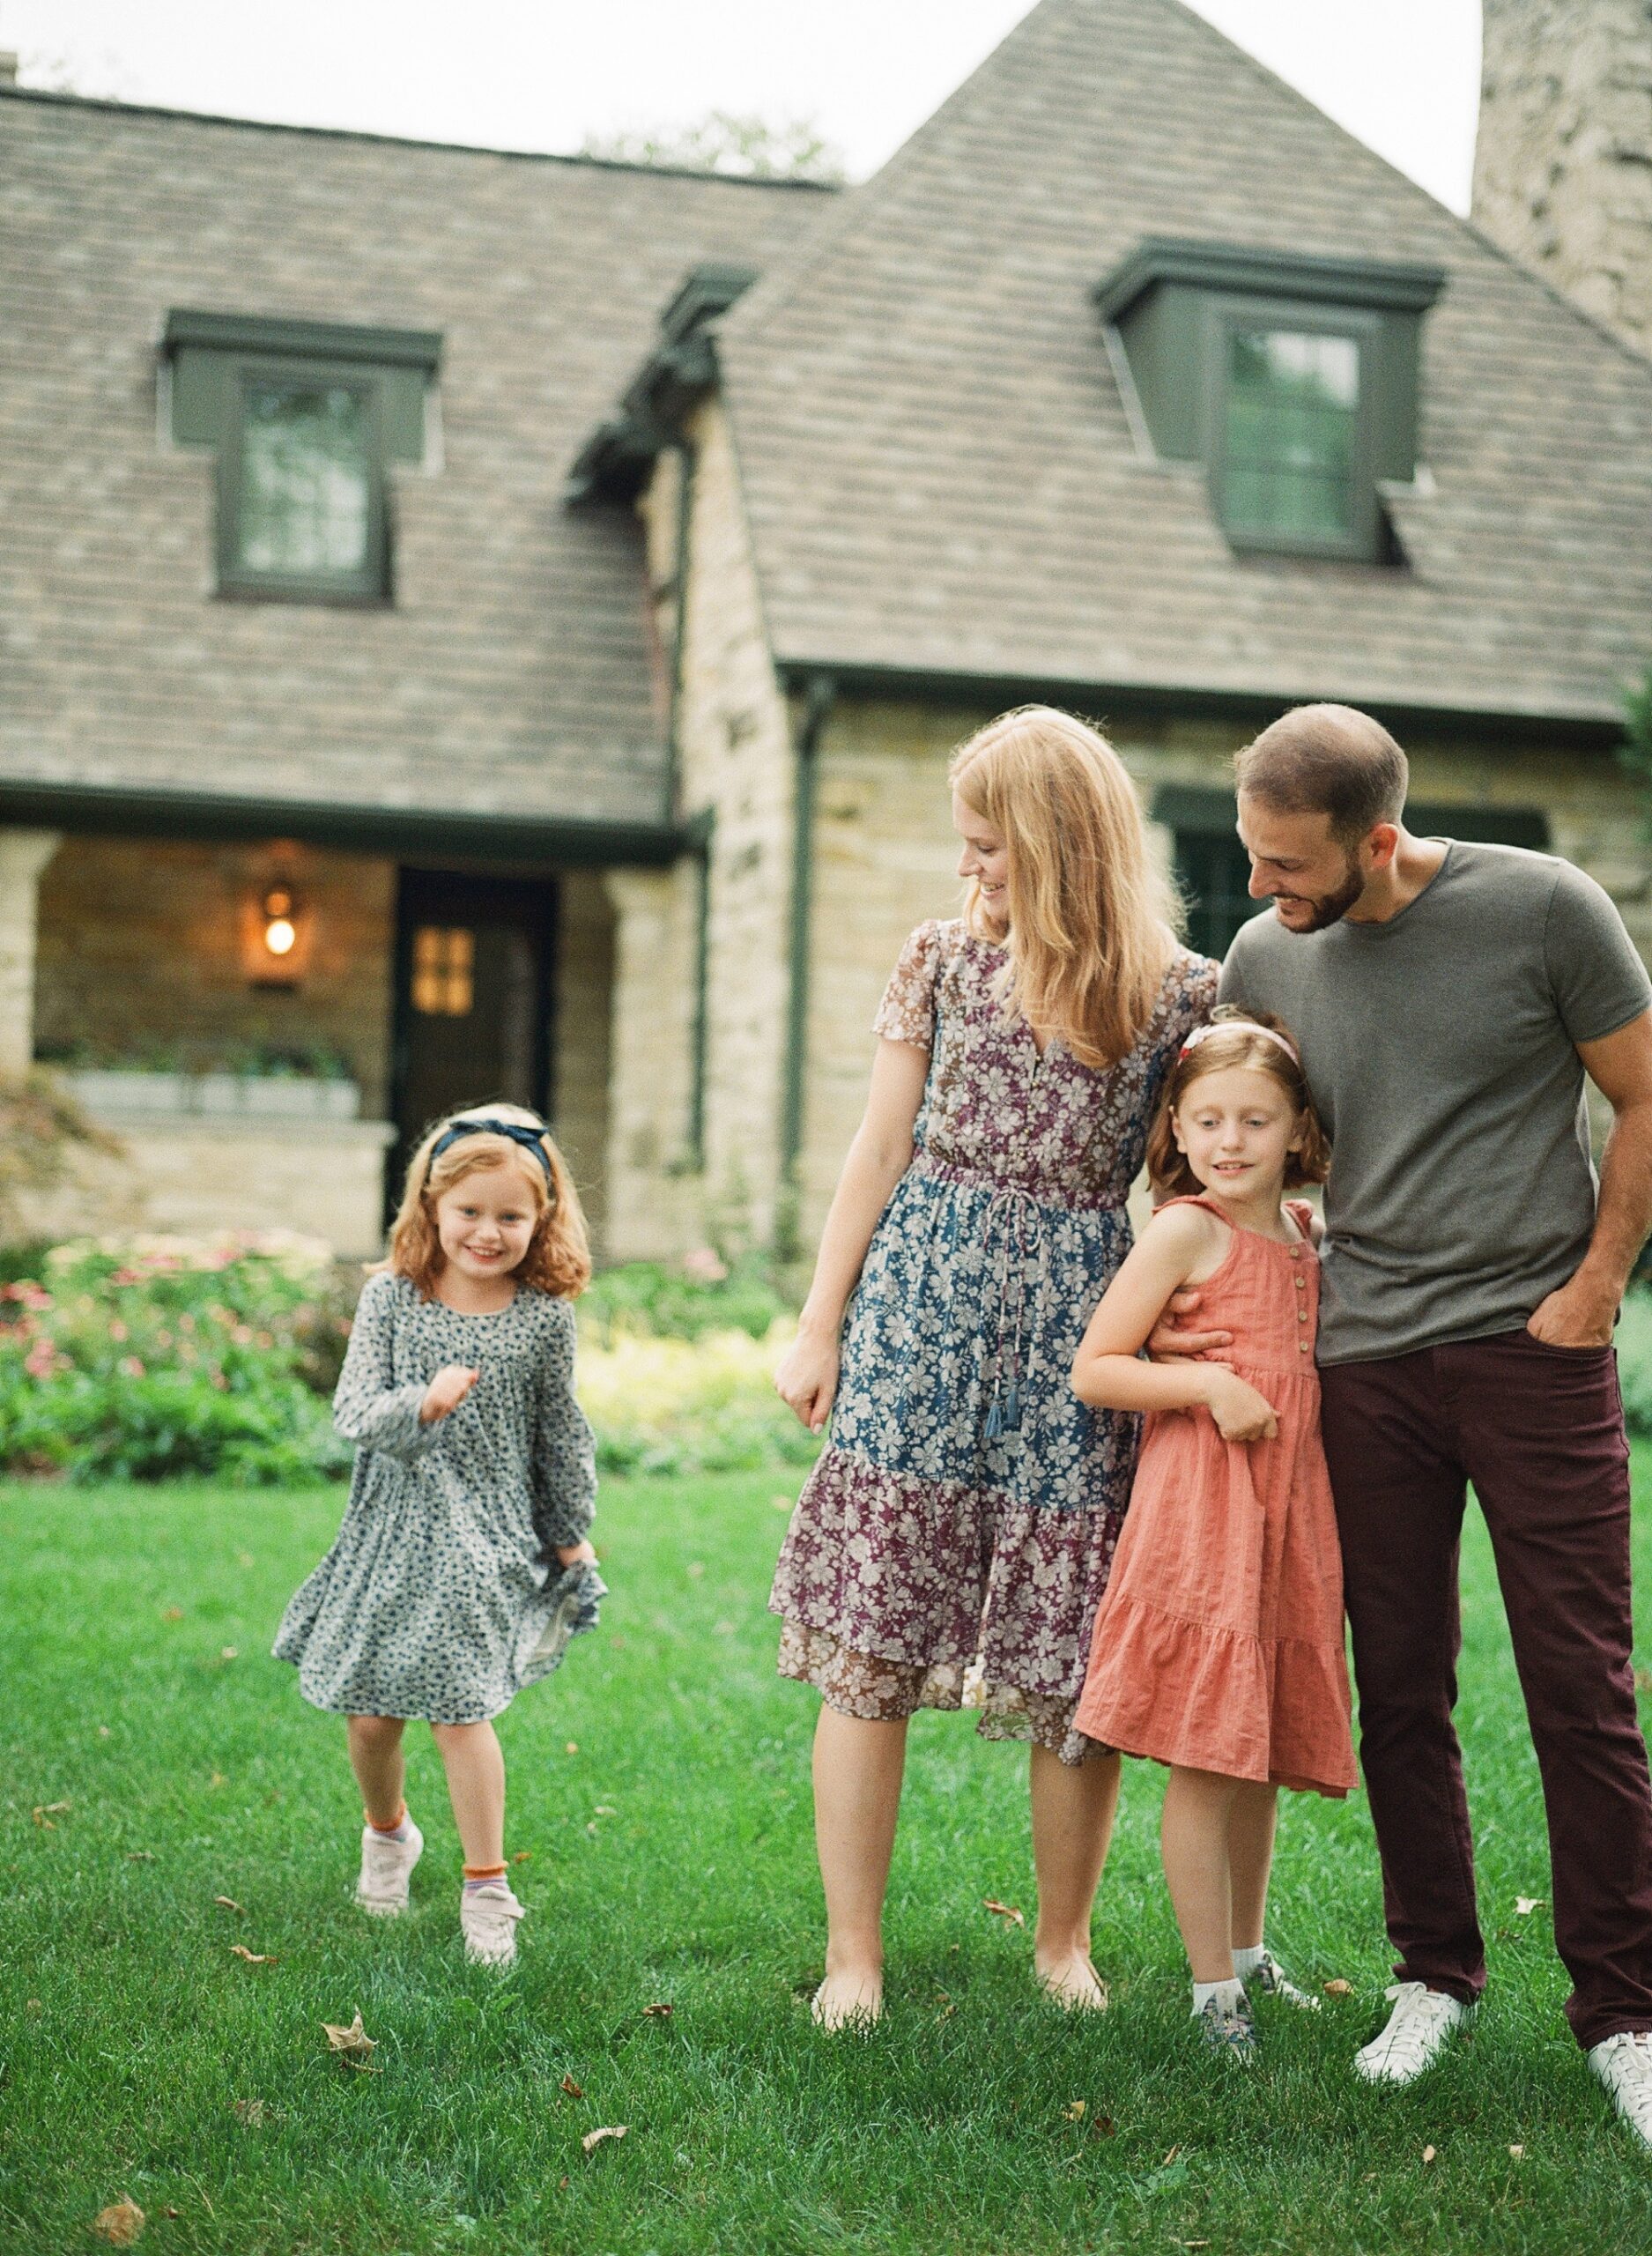 The family laughed during the chicago home lifestyle photoshoot